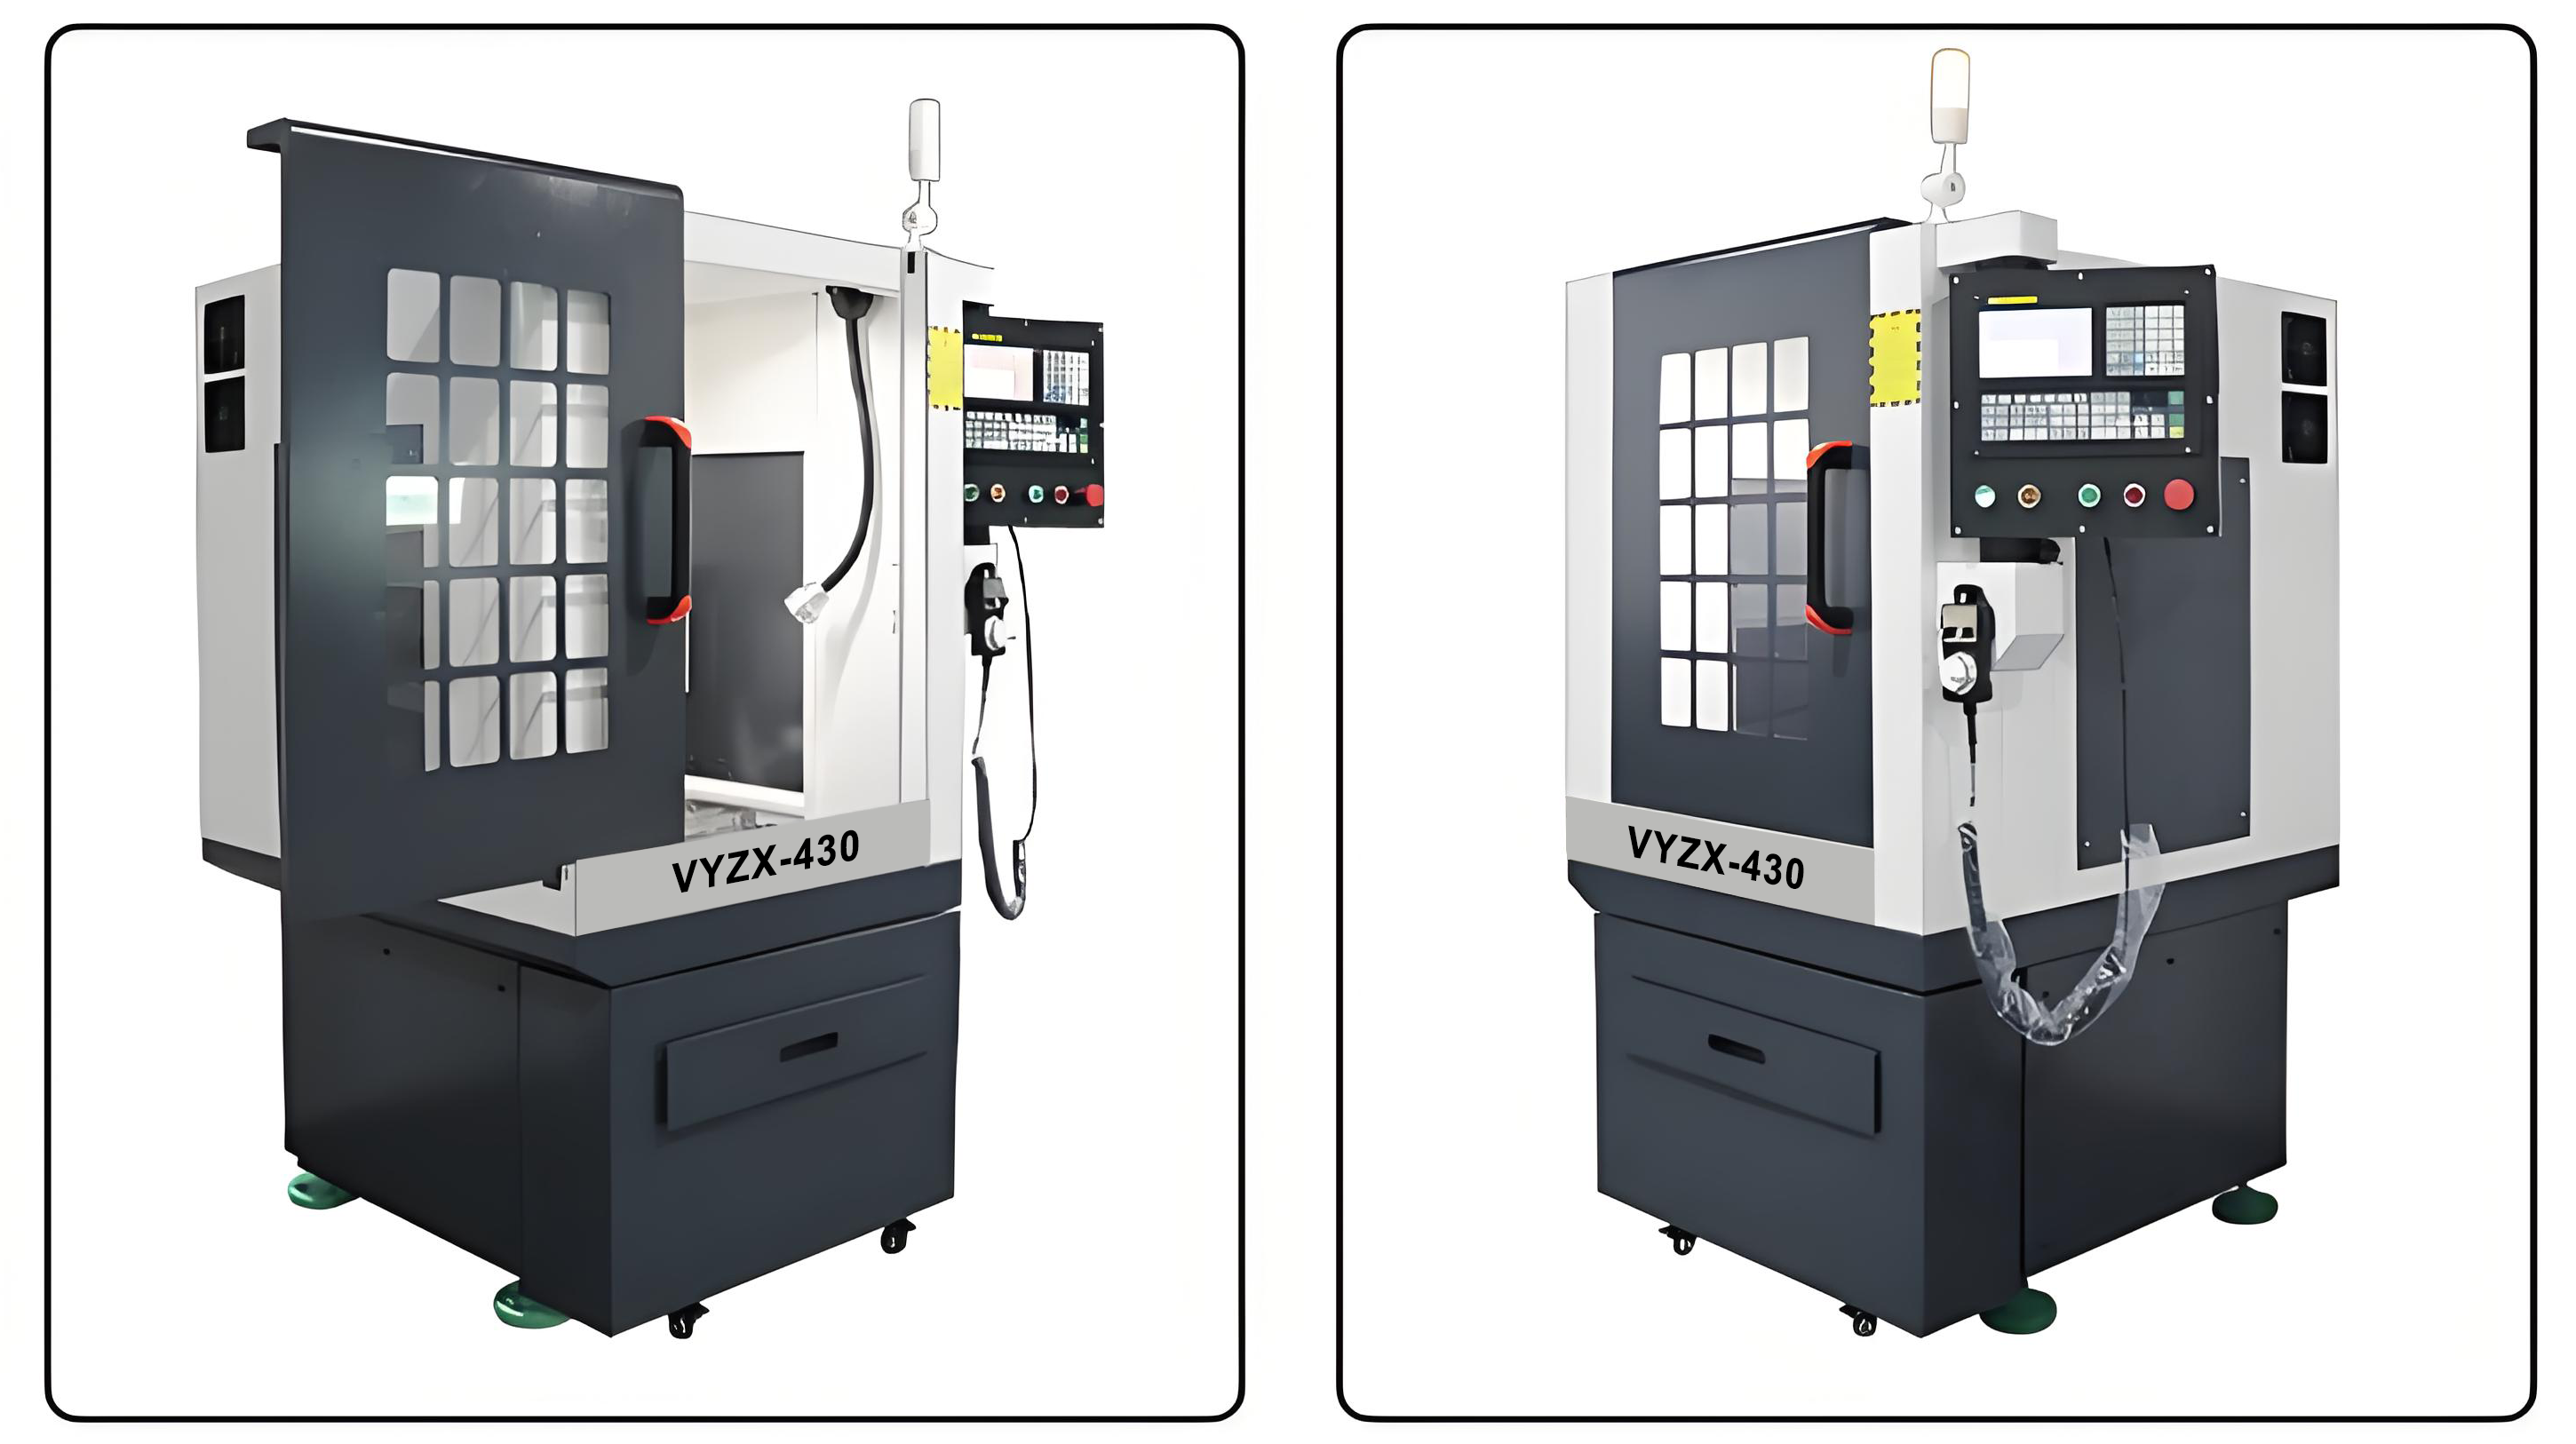 VYZX-430 engraving machine automatic tool change cnc engraving machine Small CNC metal plastic copper aluminum hot stamping plate fixture - News - 1